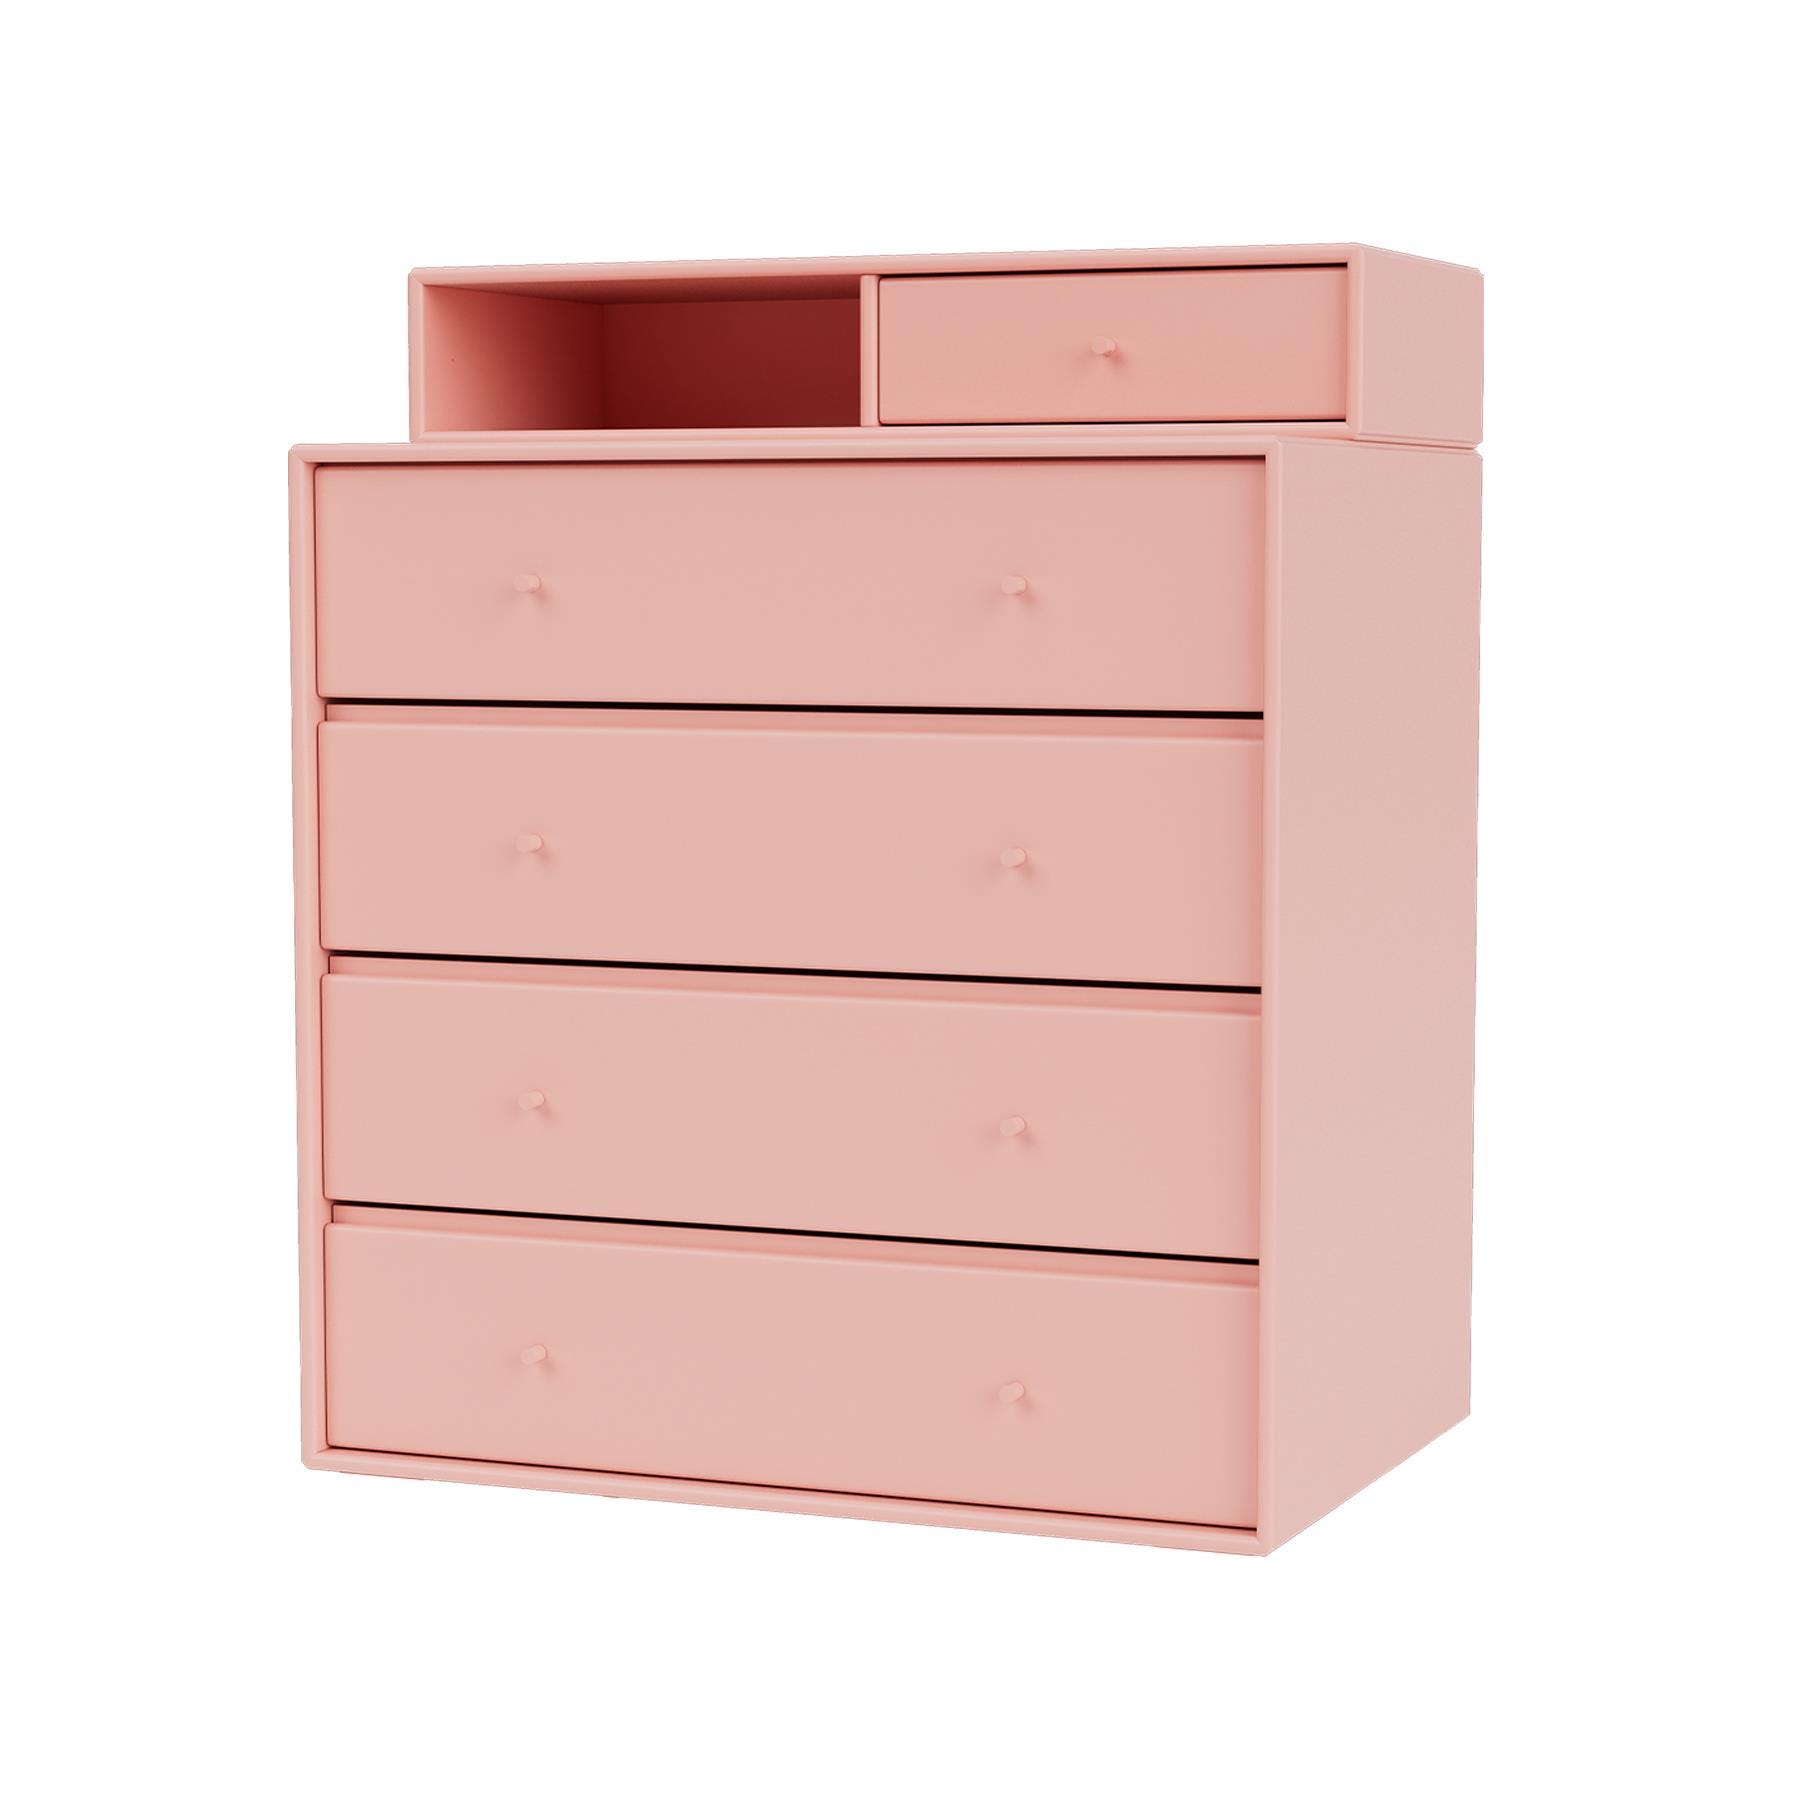 Montana Keep Chest Of Drawers Ruby Wall Mounted Pink Designer Furniture From Holloways Of Ludlow